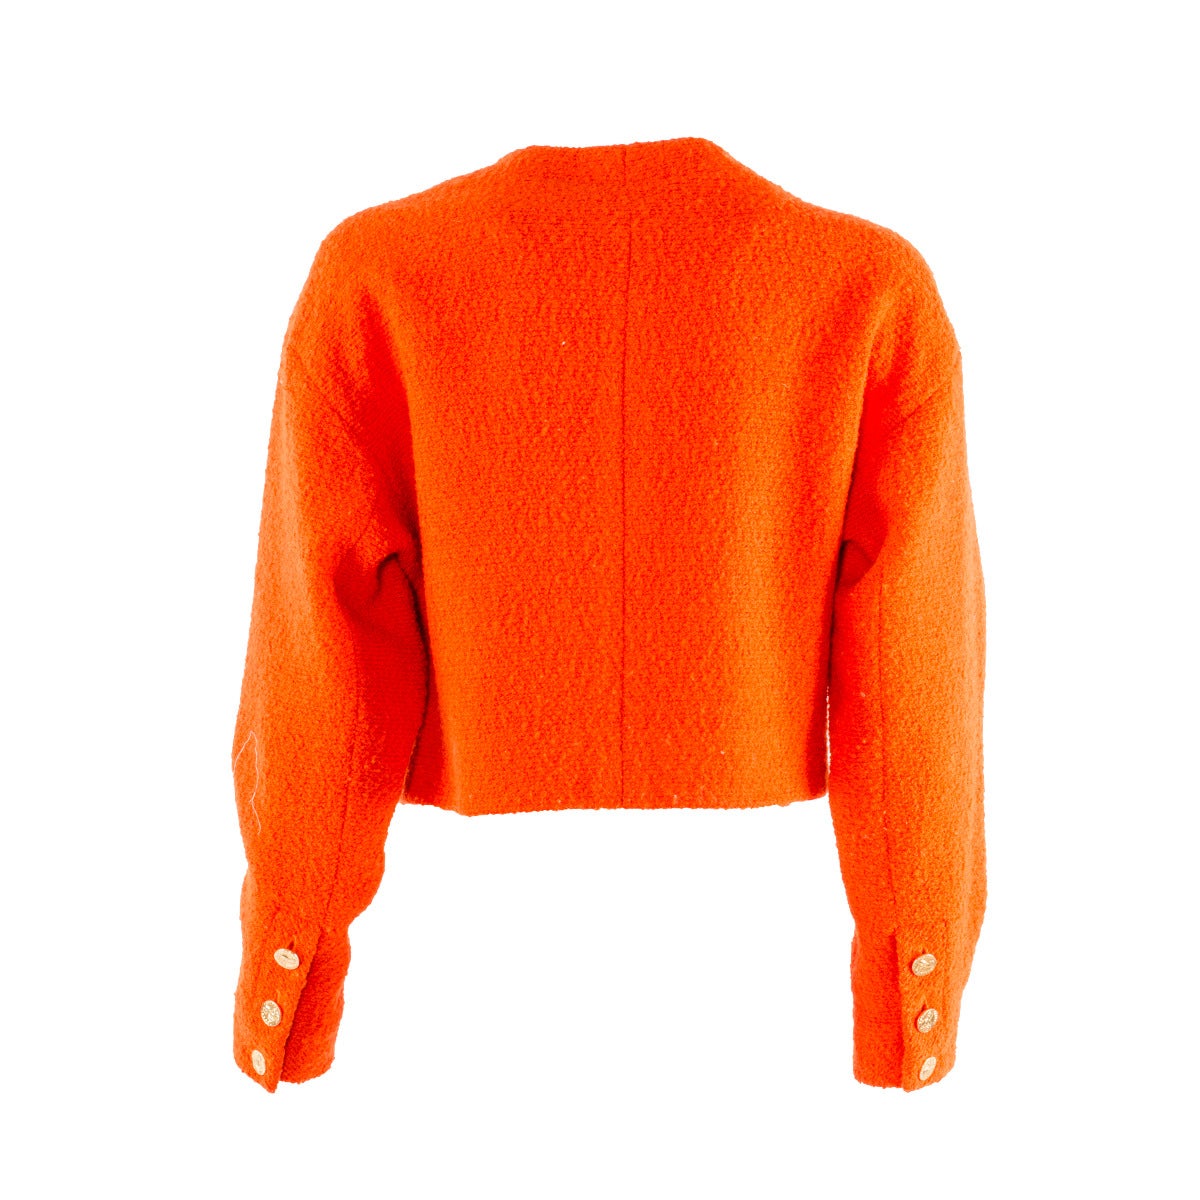 Beautiful Chanel Boutique bolero jacket
Vintage from the 90's
Orange color
Wool
Golden buttons
Two pockets
Size italian 44 (US 10)
Made in France
Worldwide express shipping included in the price !